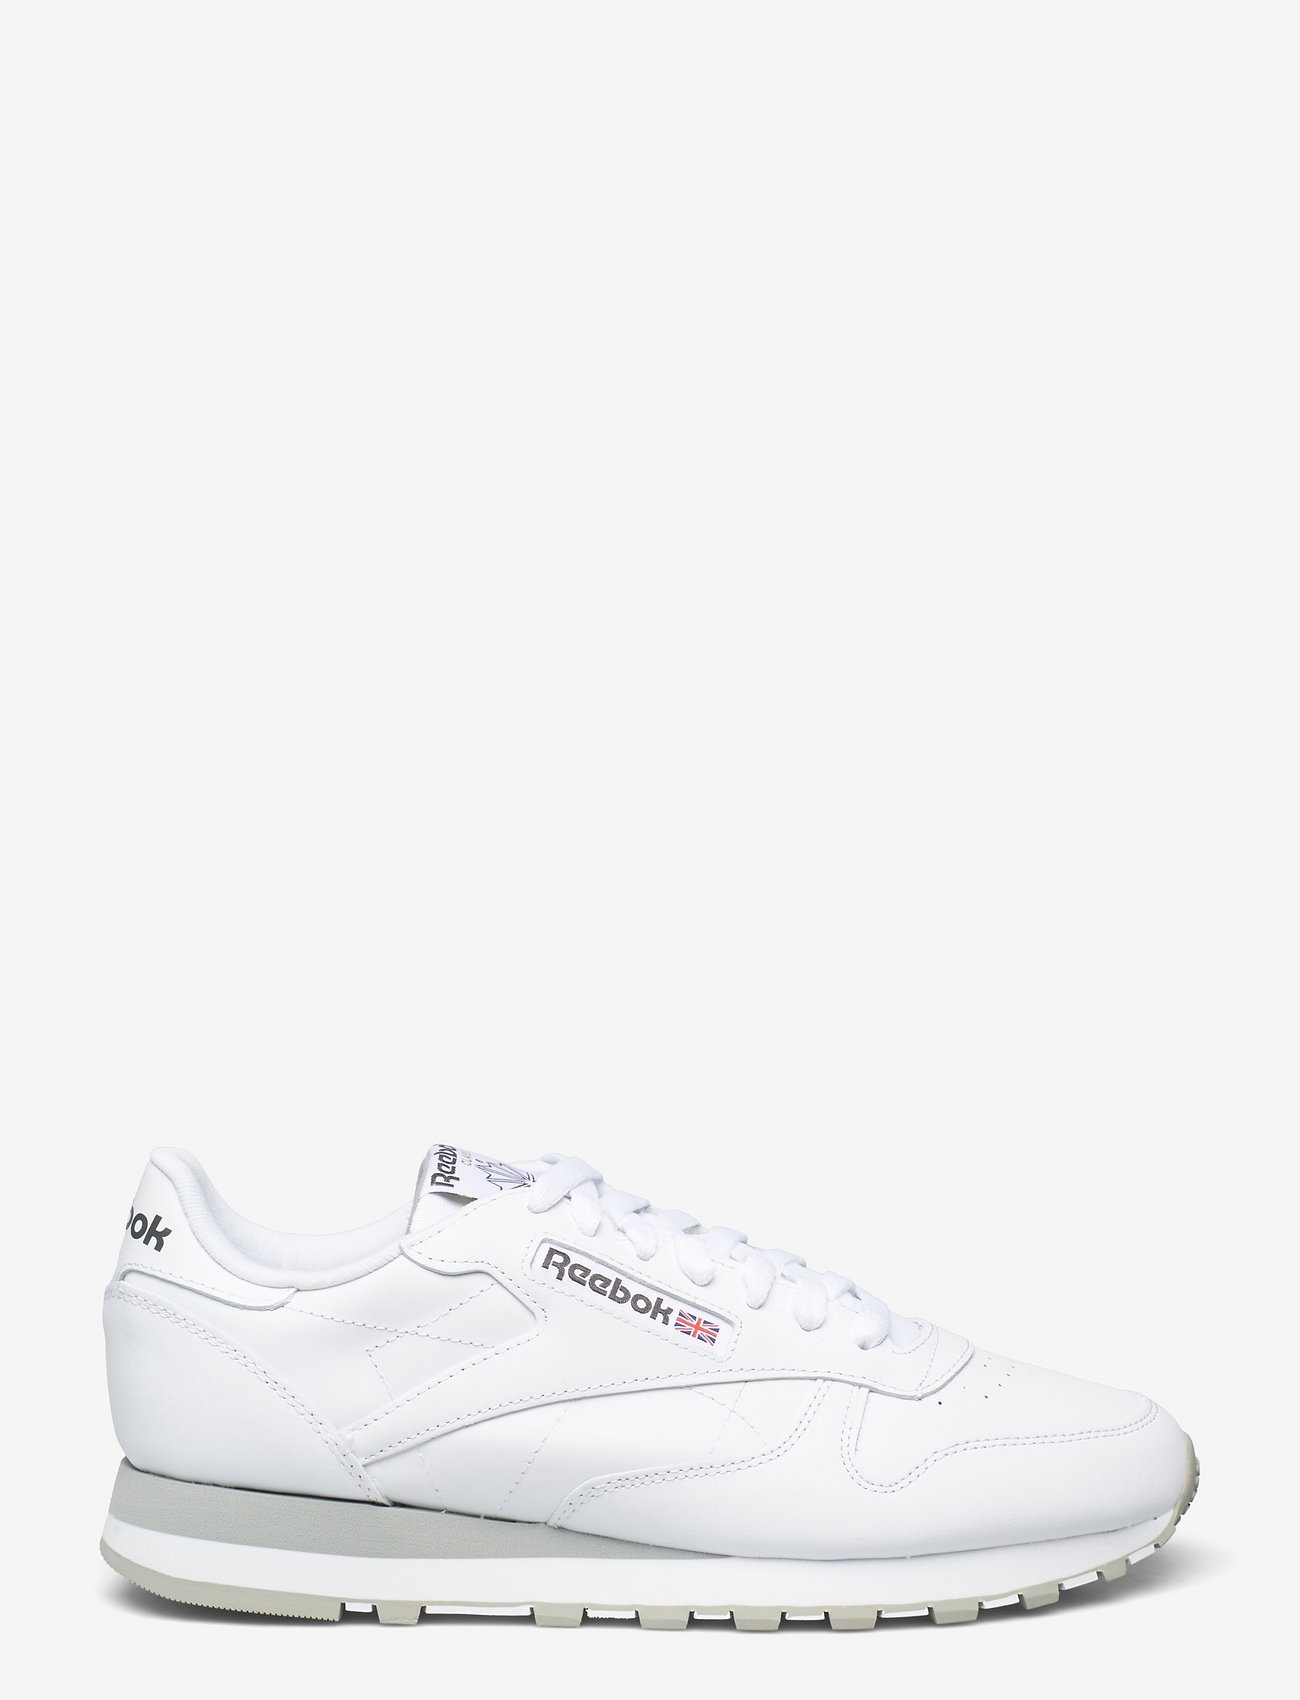 Reebok Classics - CLASSIC LEATHER - low tops - ftwwht/pugry3/purgry - 1